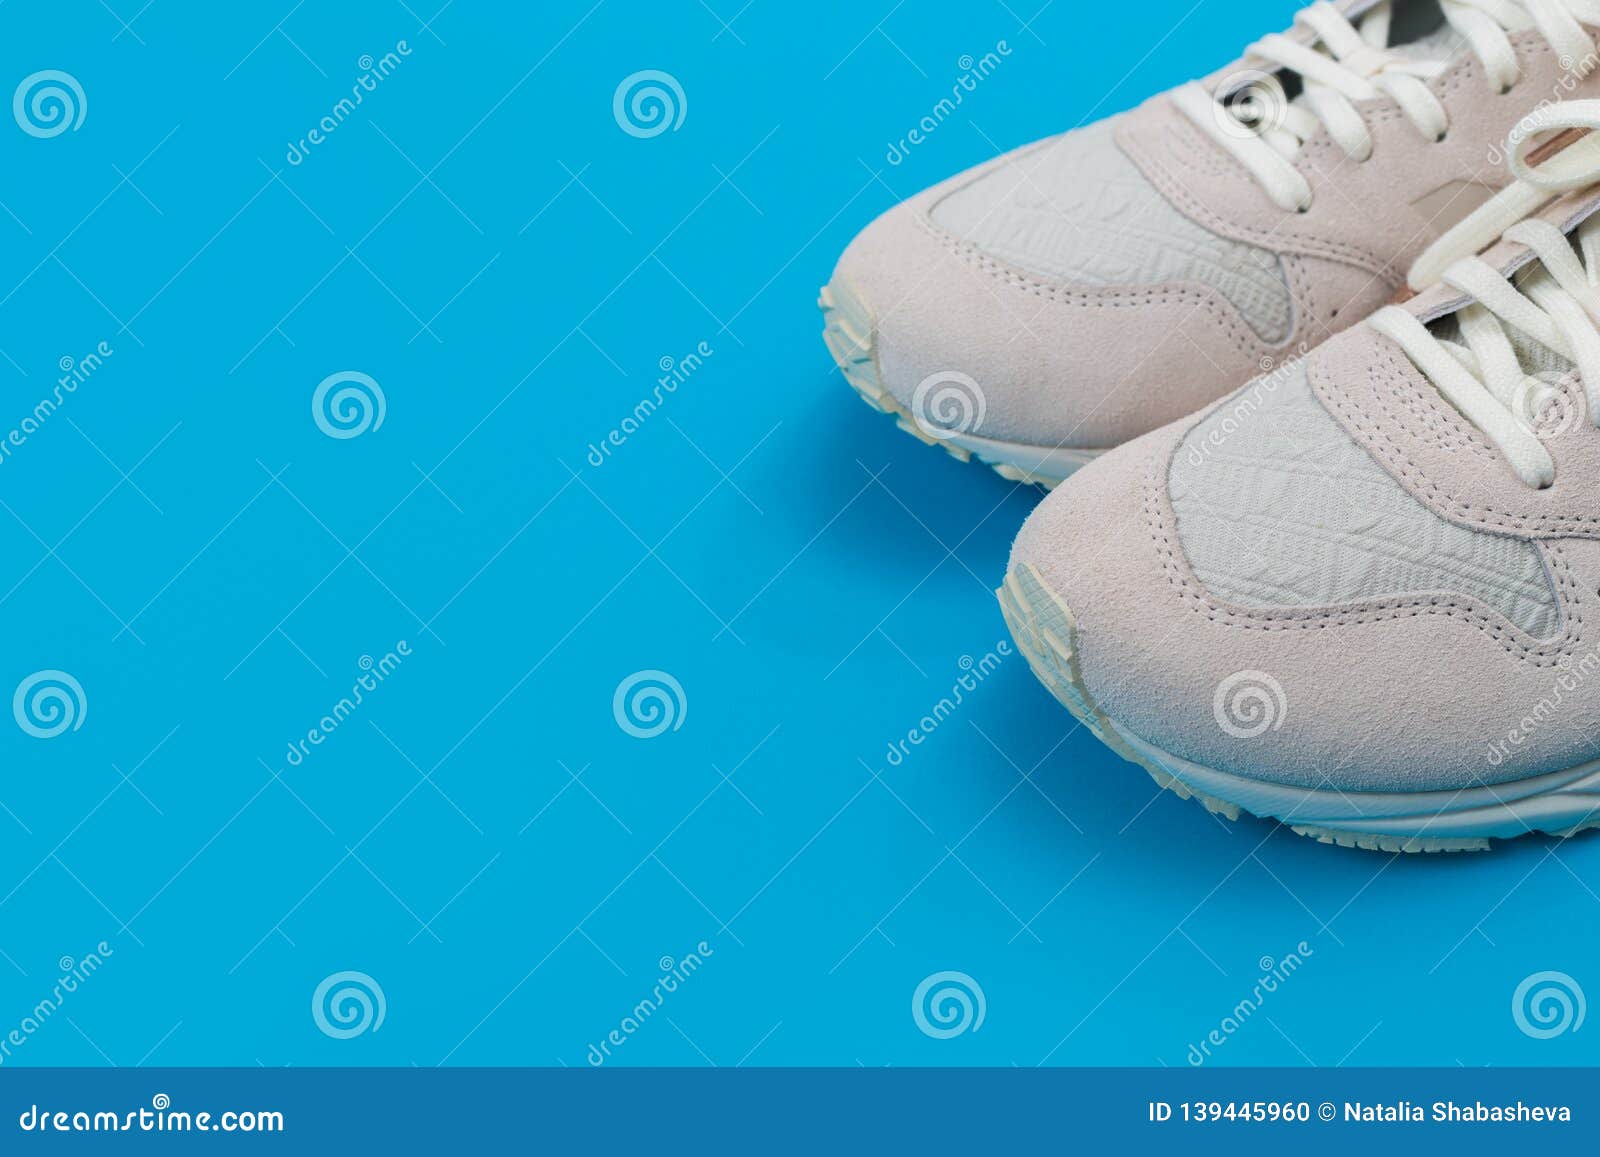 Overhead Shot of White Sneakers on Colored Background Stock Photo ...